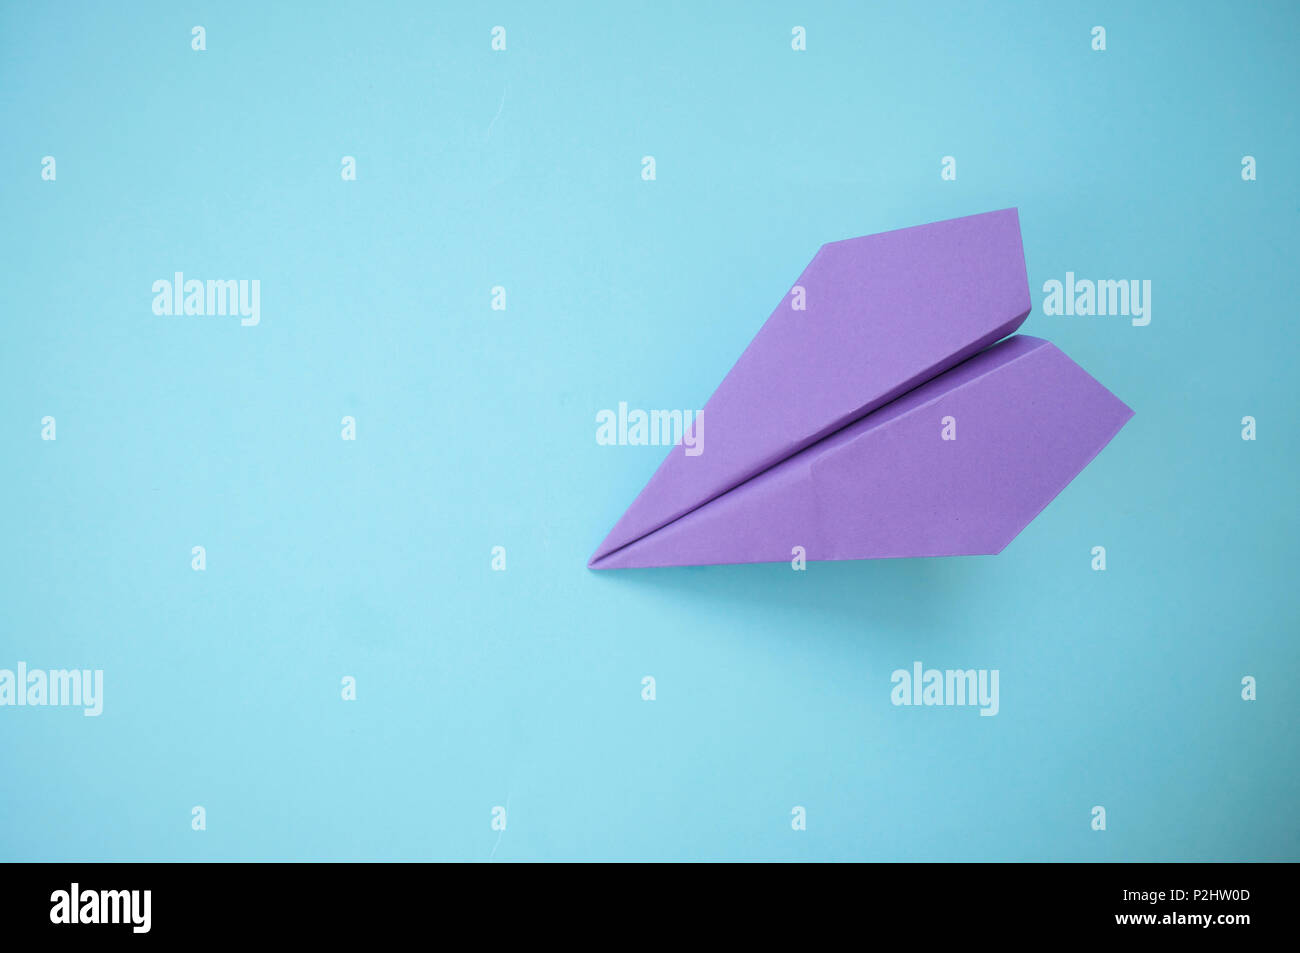 Flat lay of purple paper plane on pastel blue background with text space. Stock Photo